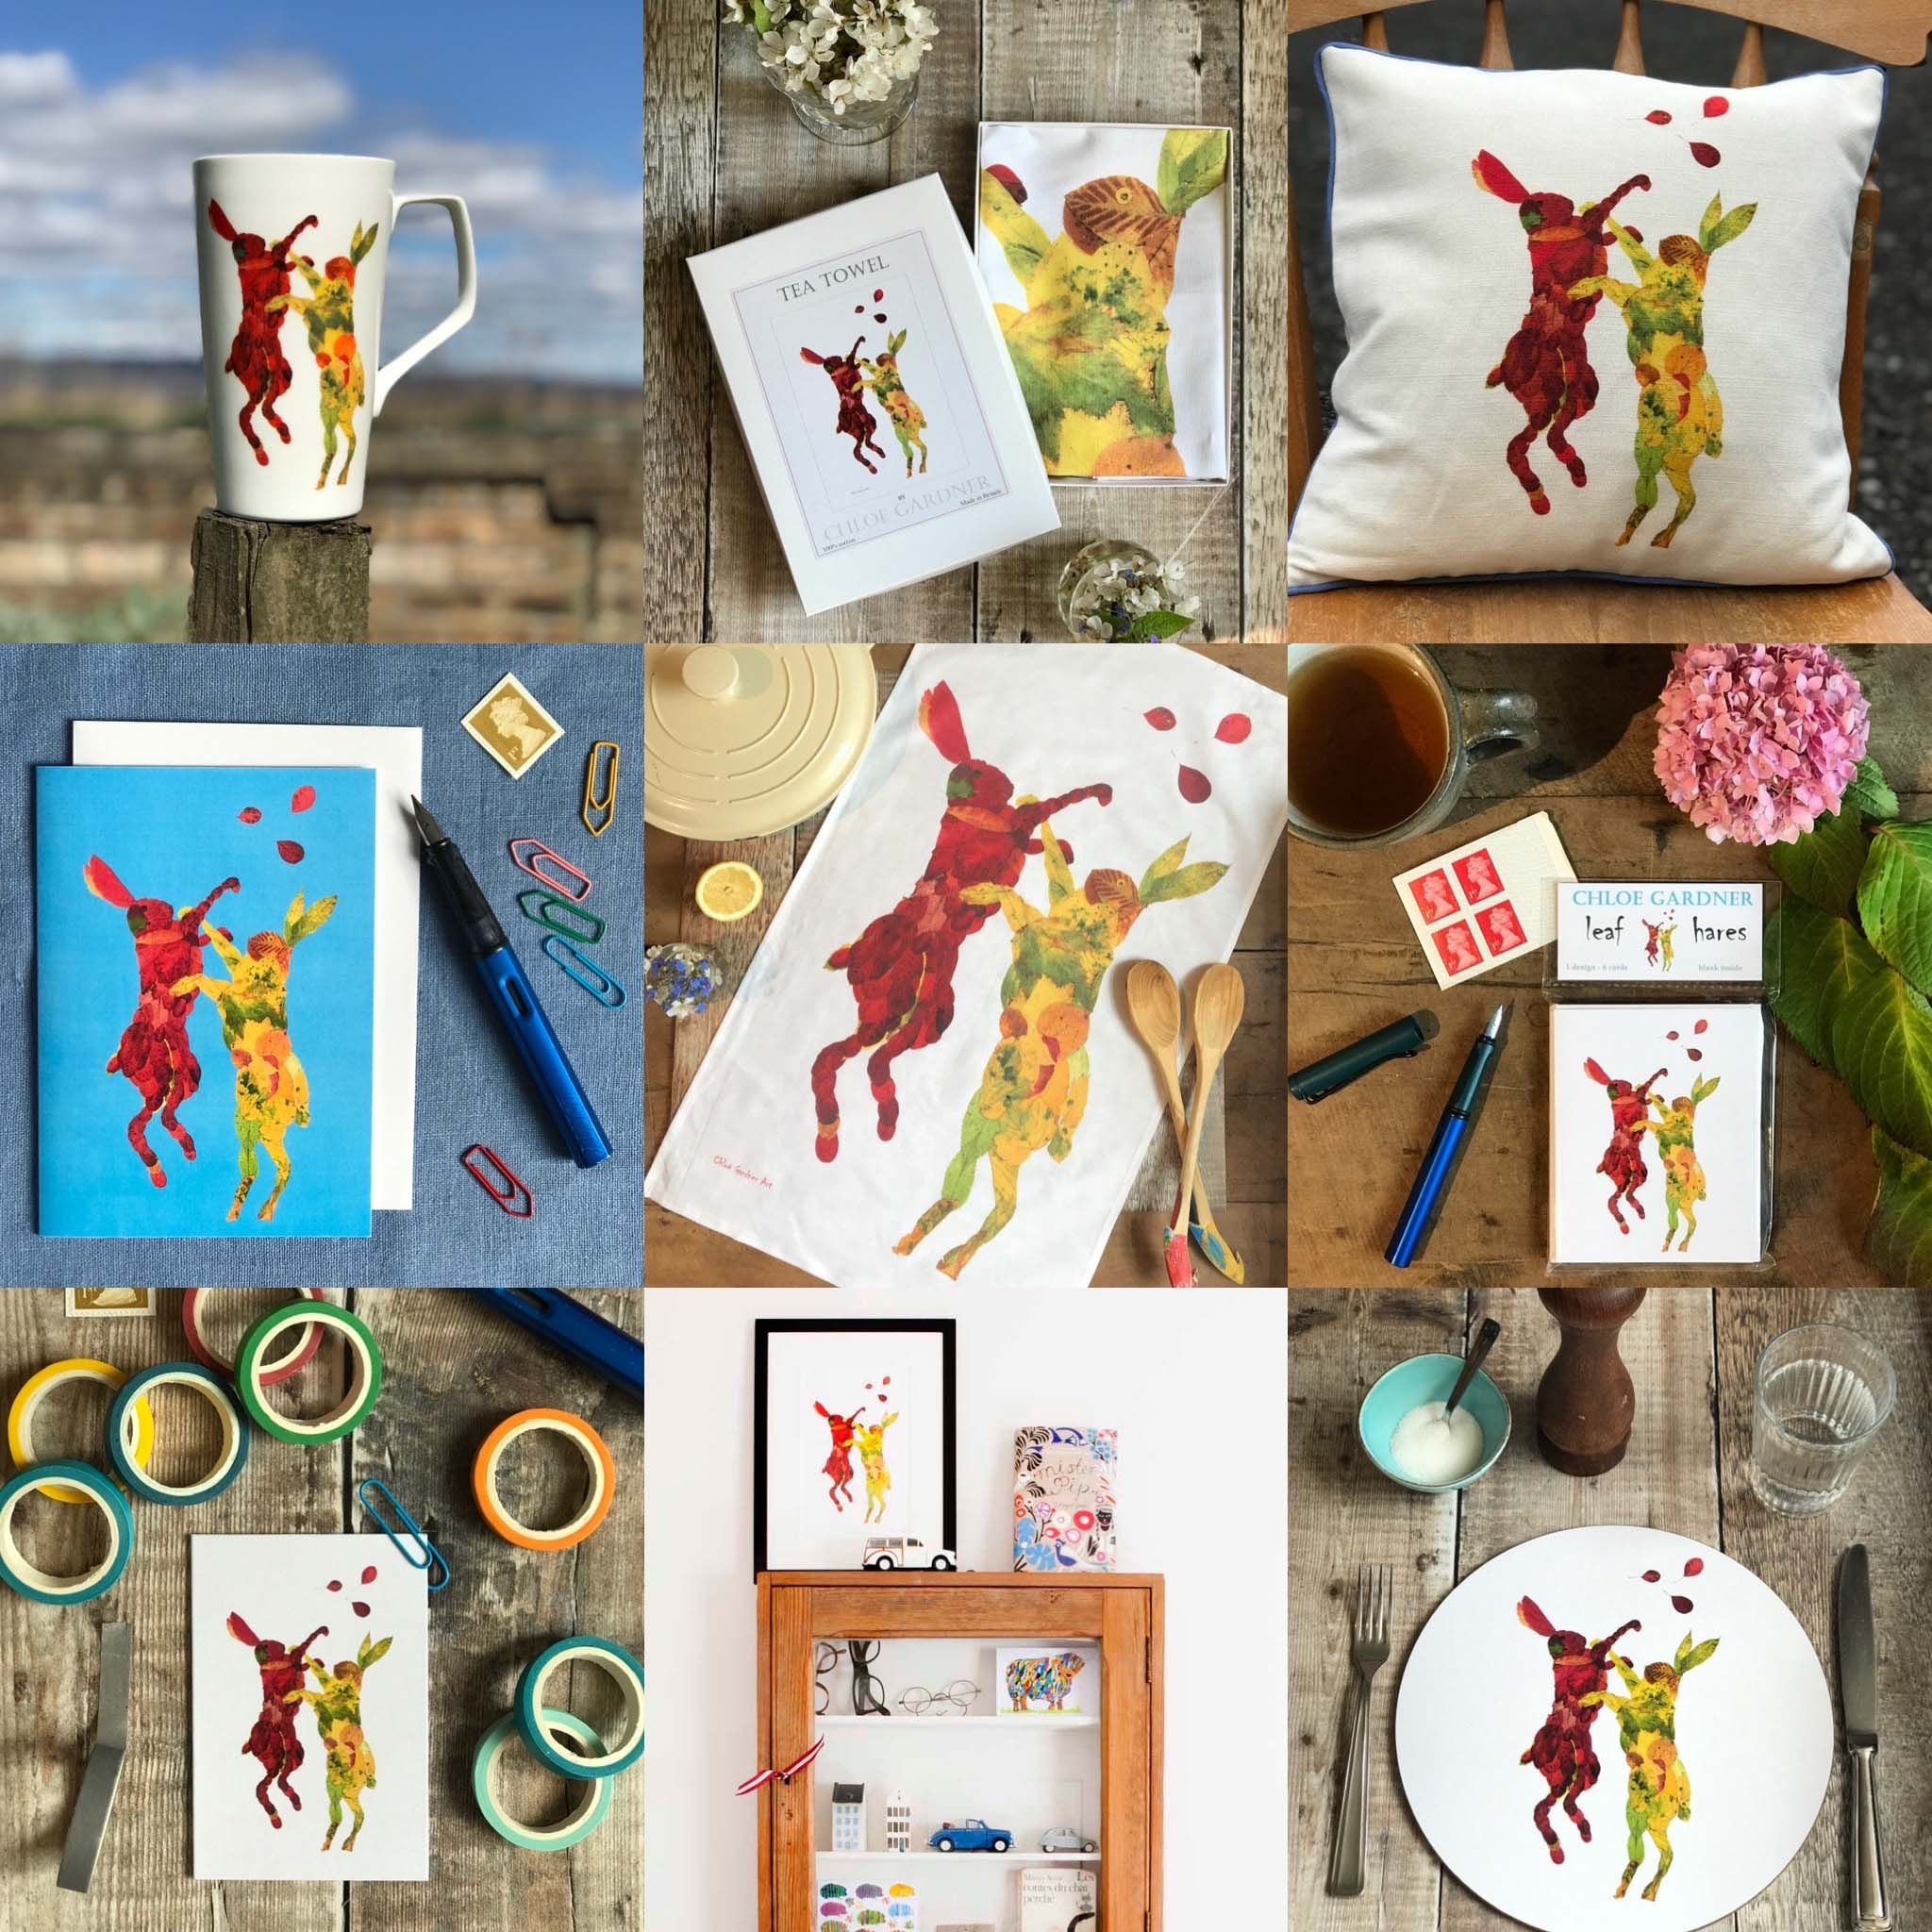 Autumnal products: An autumn leaf cow, squirrels and more..